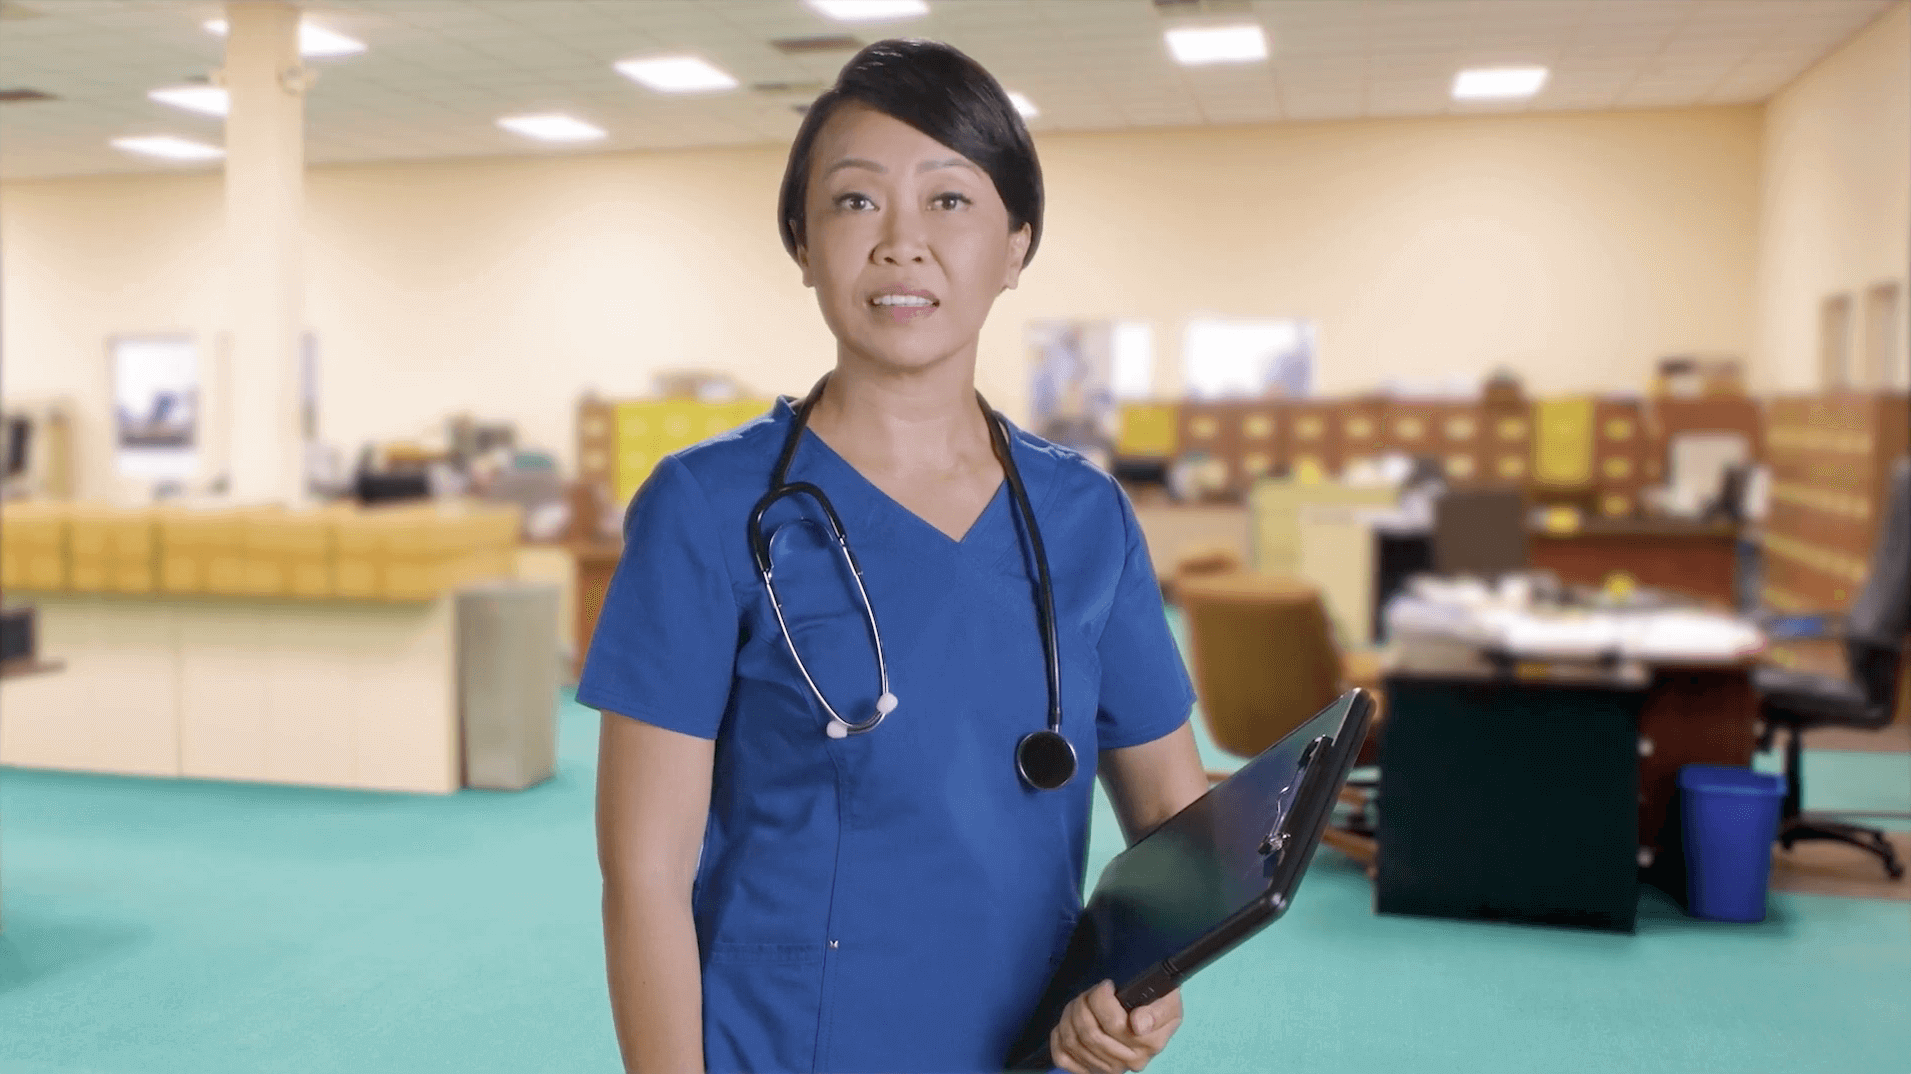 View video to learn more about a being a Nurse